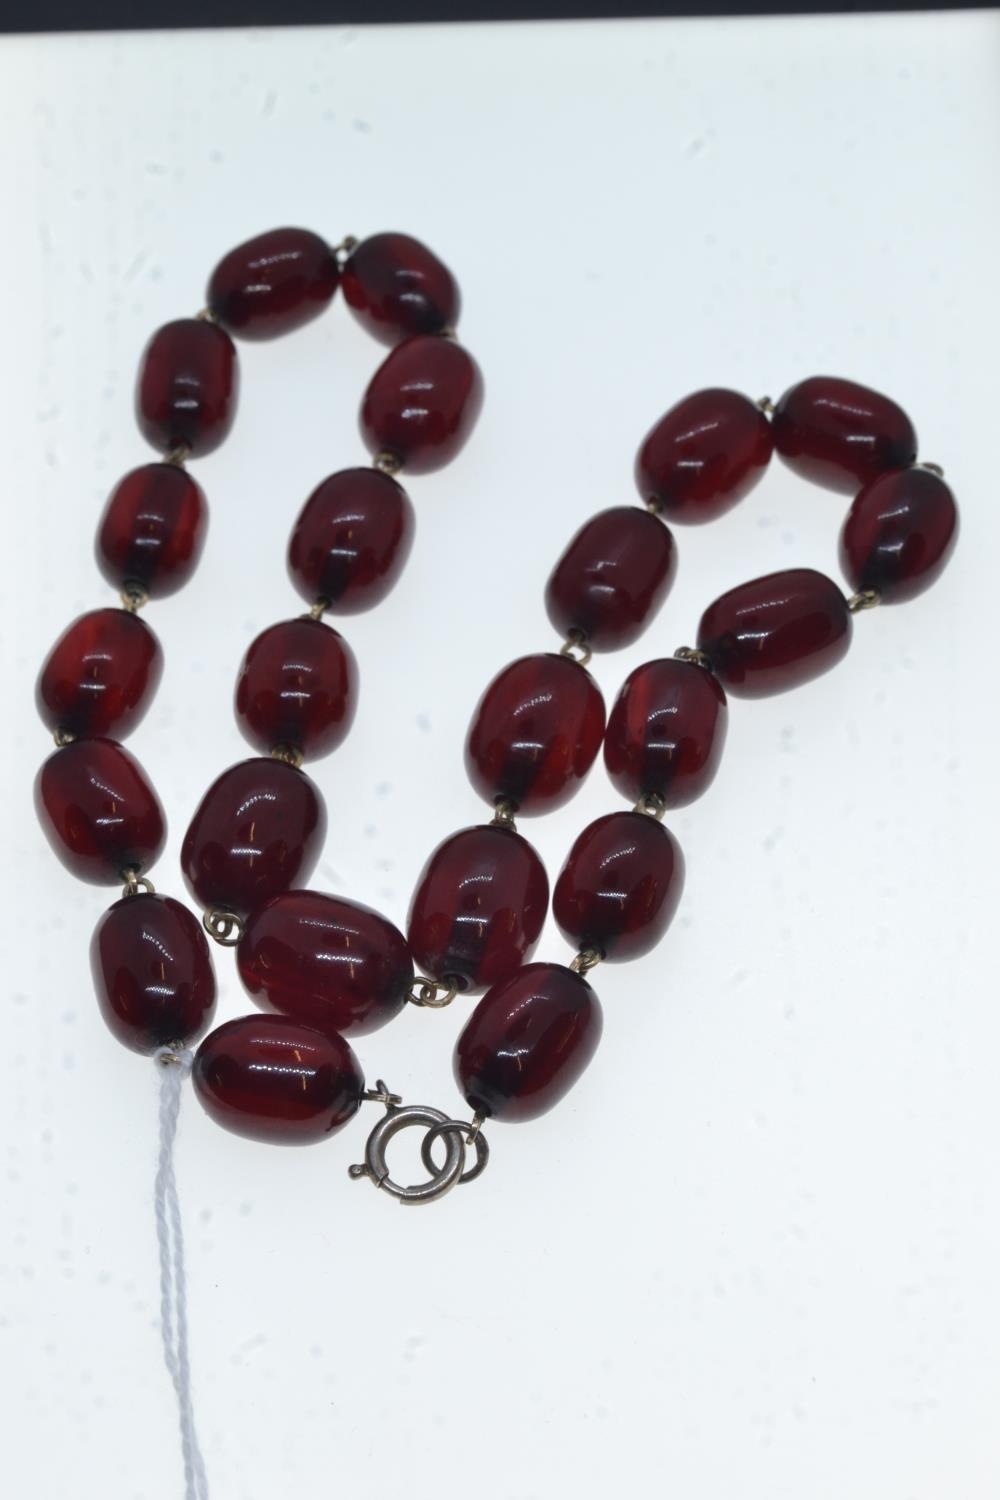 Cherry amber bead necklace, circumference 480mm, 42 grams 